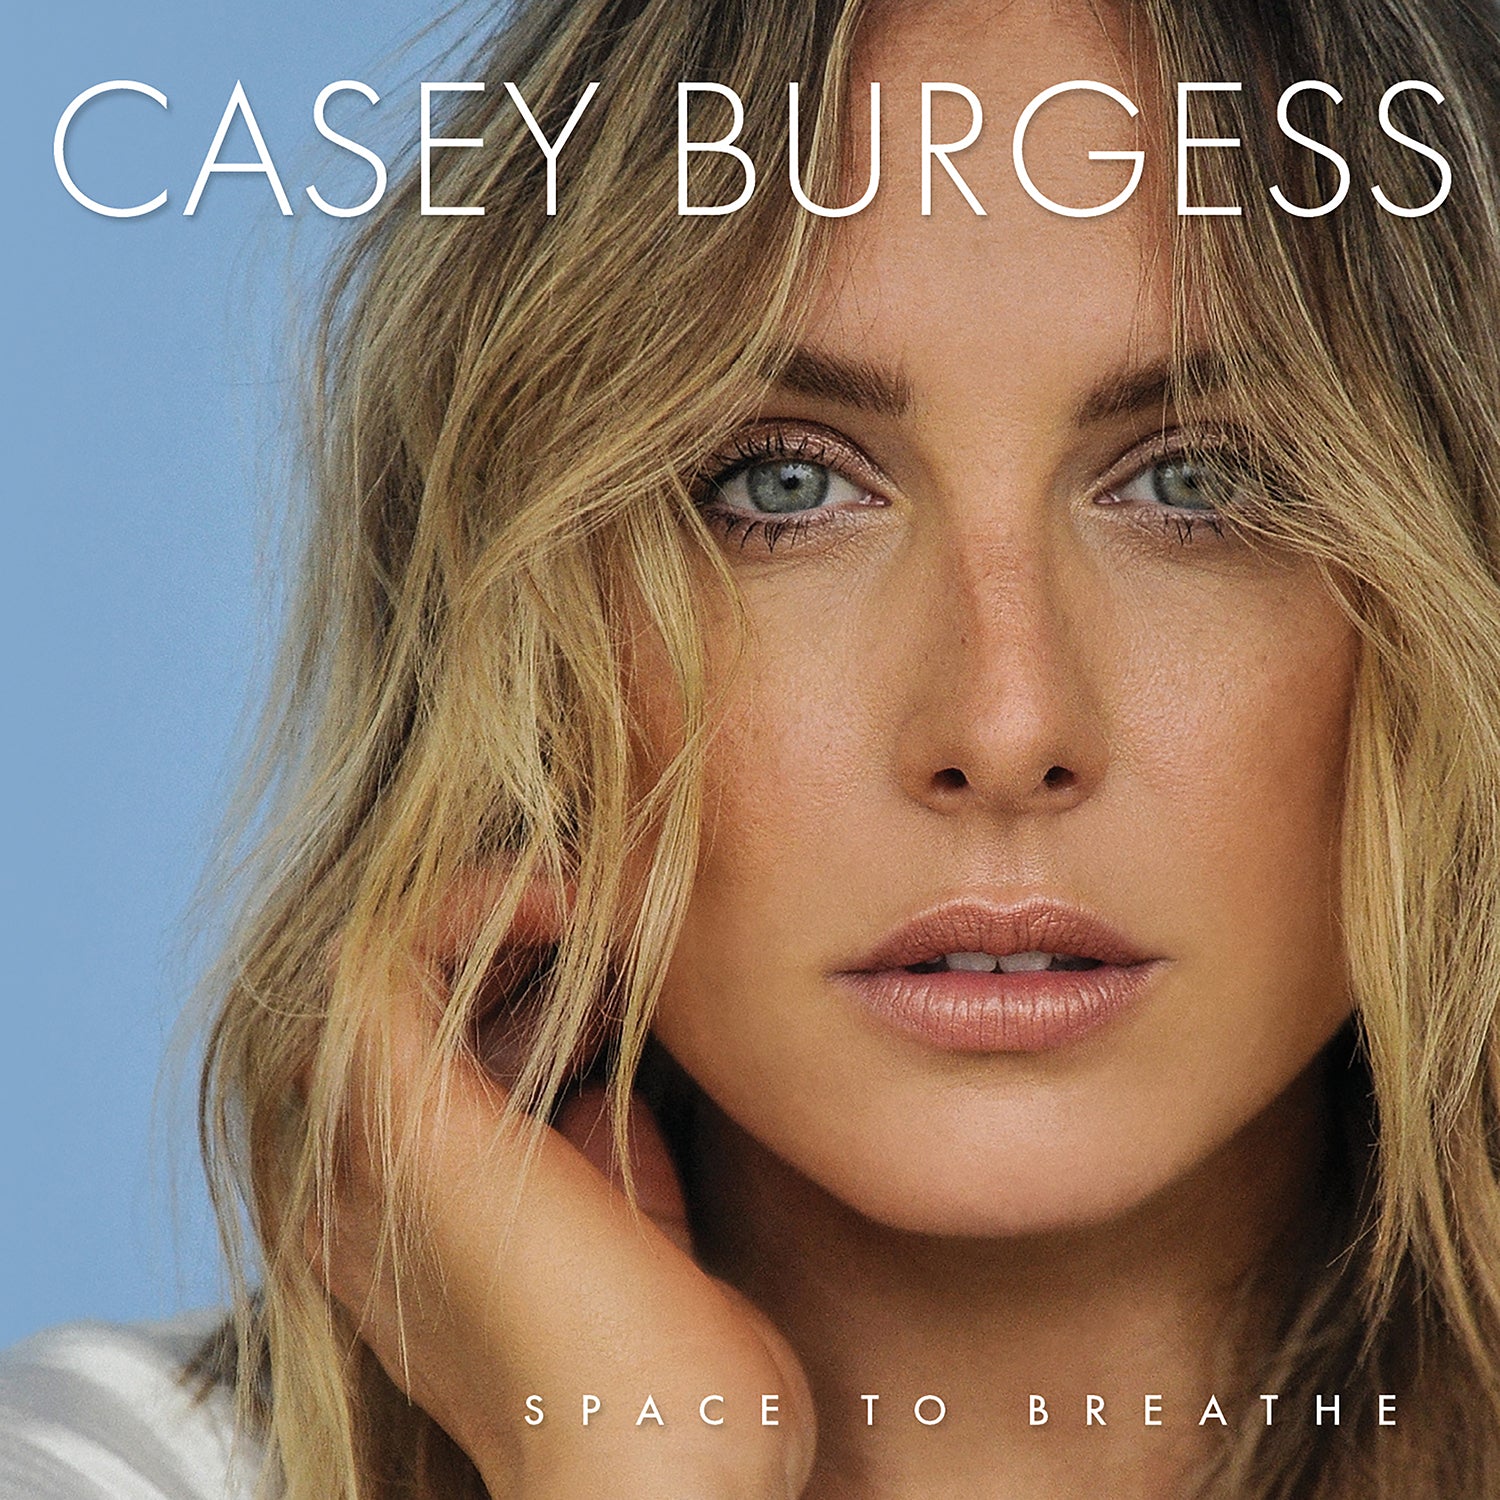 CASEY BURGESS - SPACE TO BREATHE